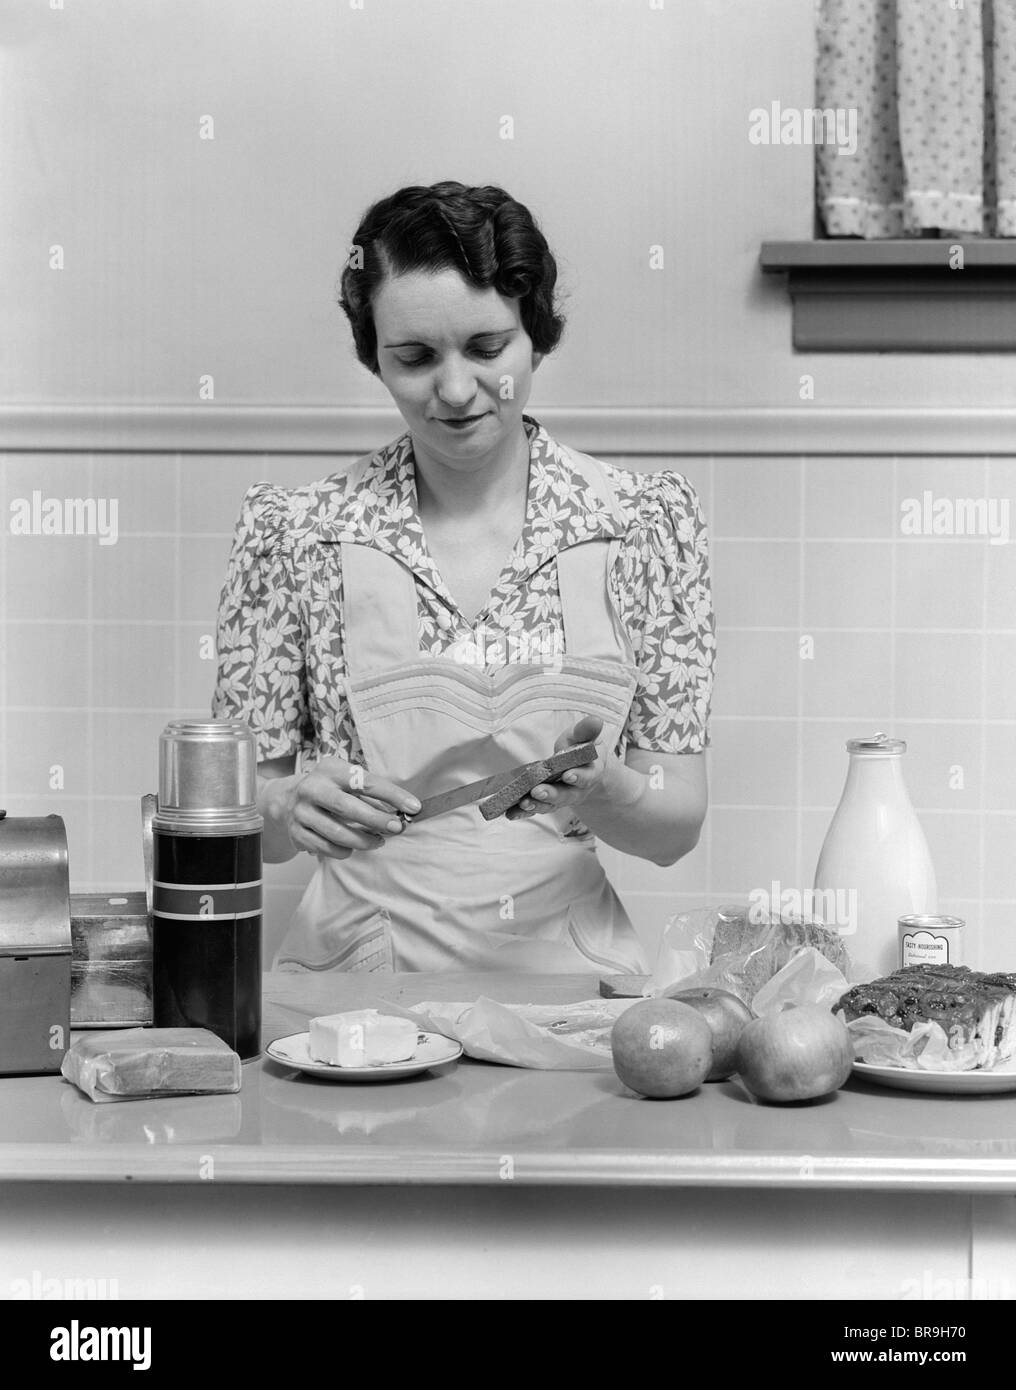 https://c8.alamy.com/comp/BR9H70/1930s-woman-housewife-in-kitchen-wearing-apron-making-sandwich-packing-BR9H70.jpg